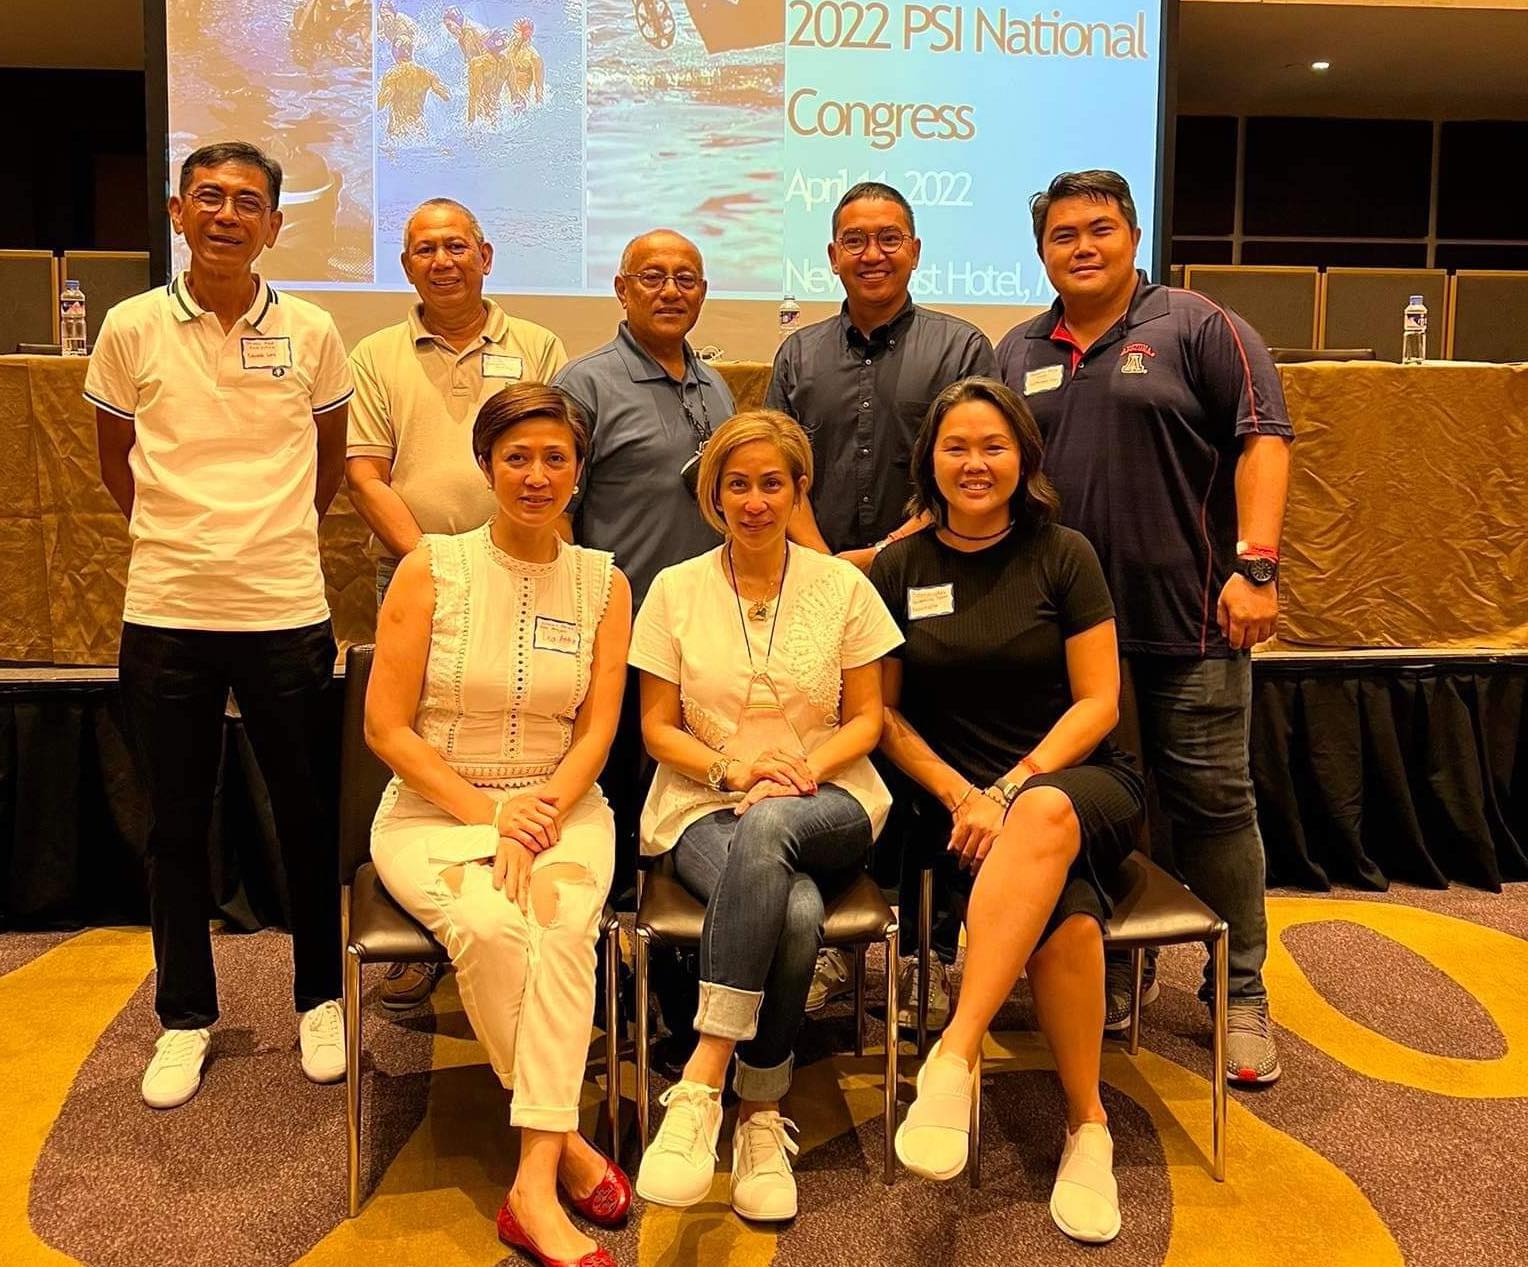 Philippine Swimming, Inc. (PSI) chairman and president Lailani Velasco, middle, with fellow board of trustees following the PSI election during their congress at the New Coast Hotel in Manila. With her are, from left, Edgardo Lora, Conreylito Dalisay, Vero Paloma, Sherwyn Santiago, Jefferson Lao, (front row) Lea Antig and Antoninette Mendoza. (PSI Photo